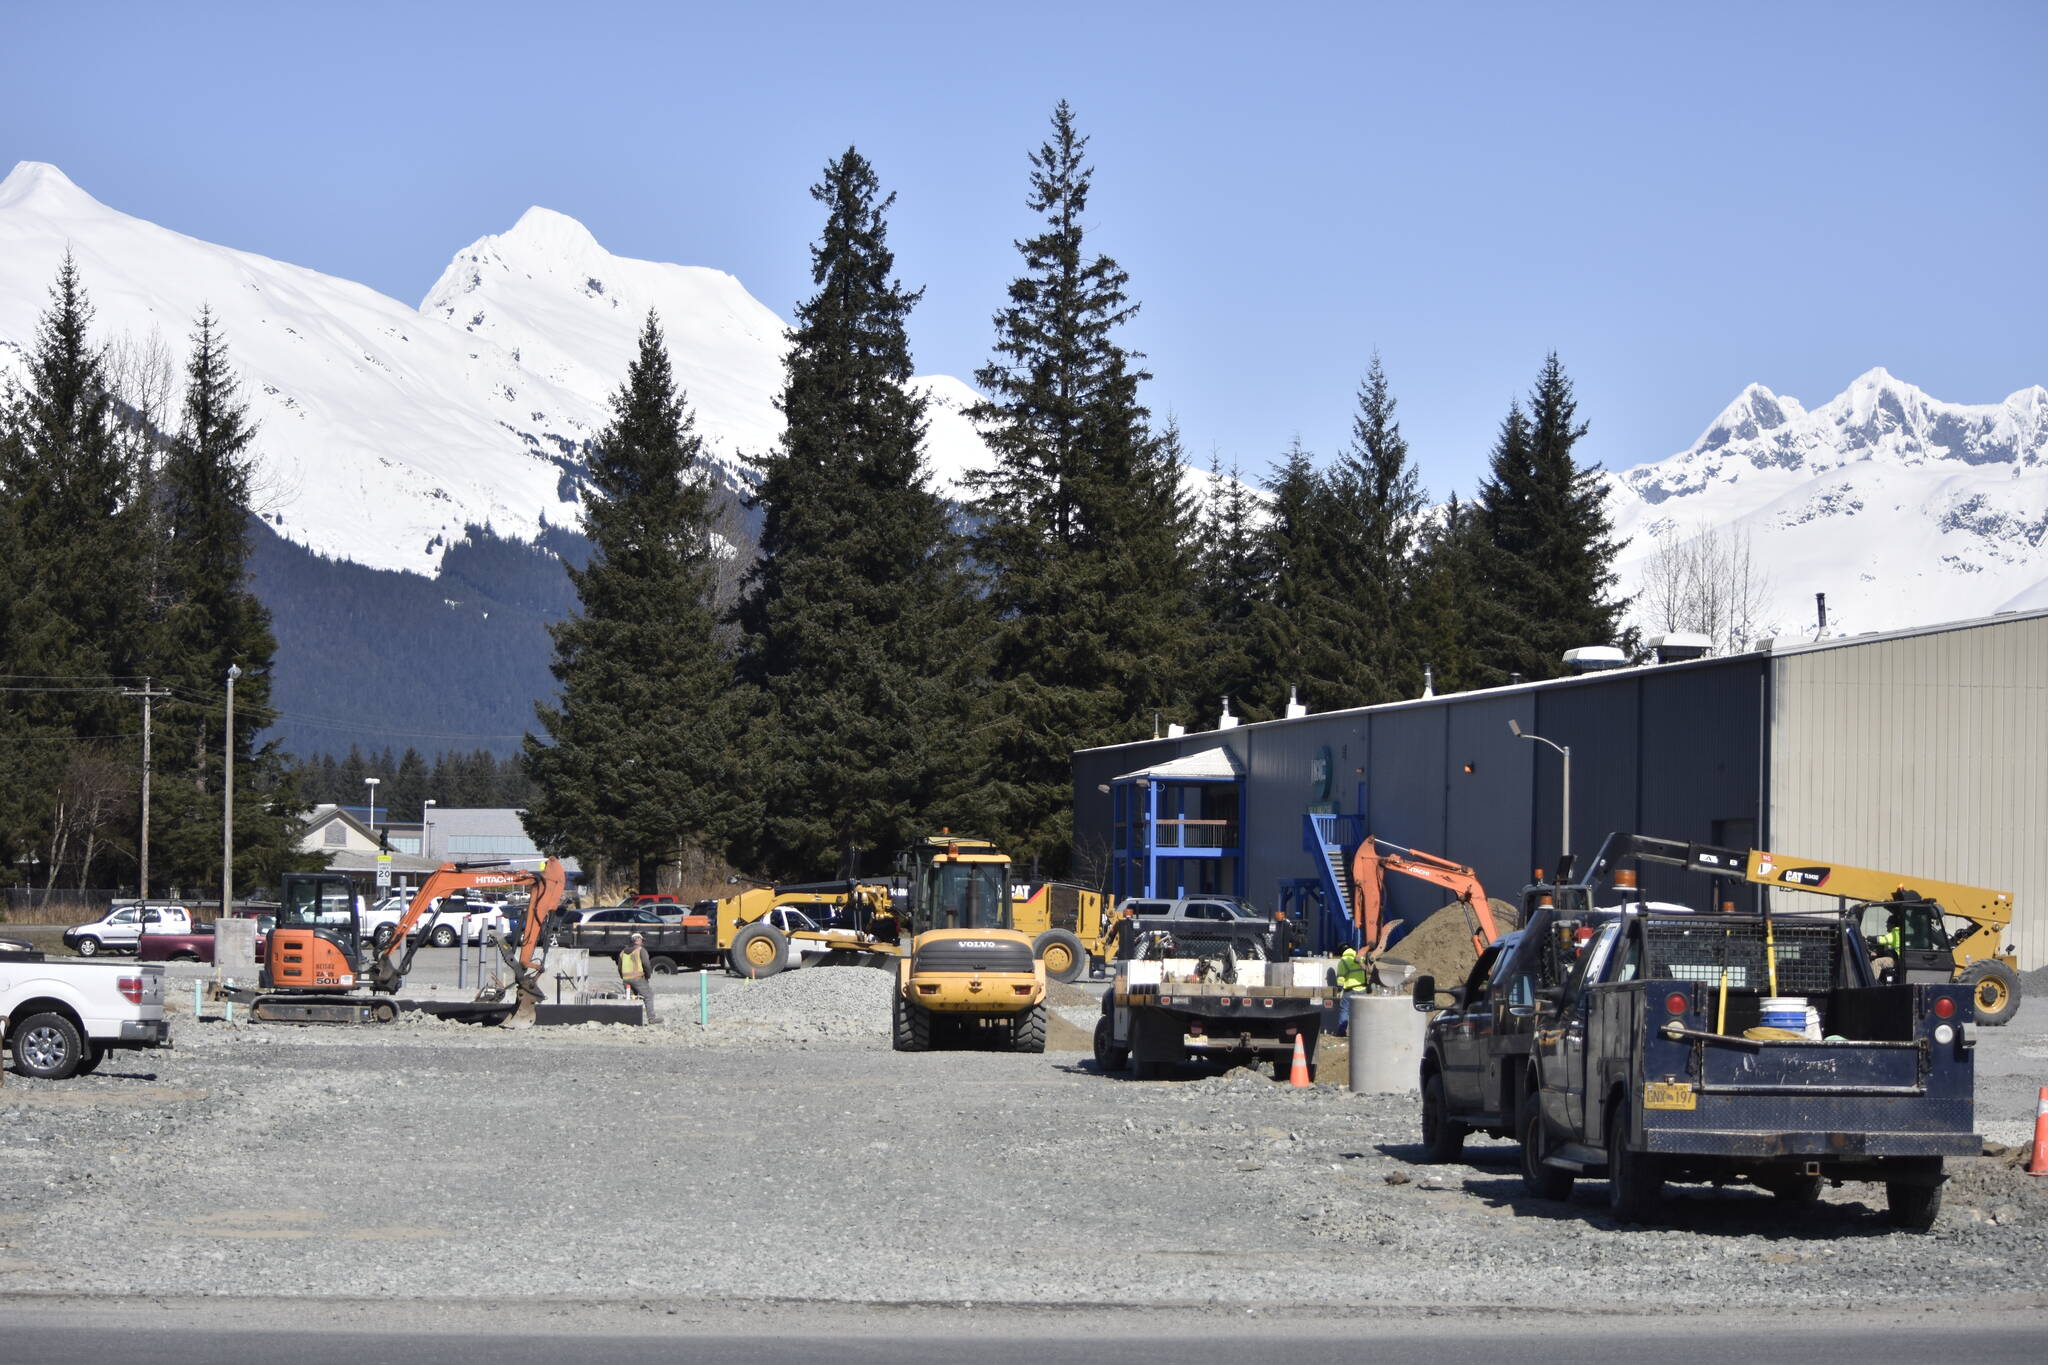 Construction on Capital Transit's new Mendenhall Valley Transit Center was underway on Thursday, April 14, 2022, on Mendenhall Mall Road. Officials hope the center to be open in July and are seeking public feedback about the scheduling of bus routes from the new center. (Peter Segall / Juneau Empire)